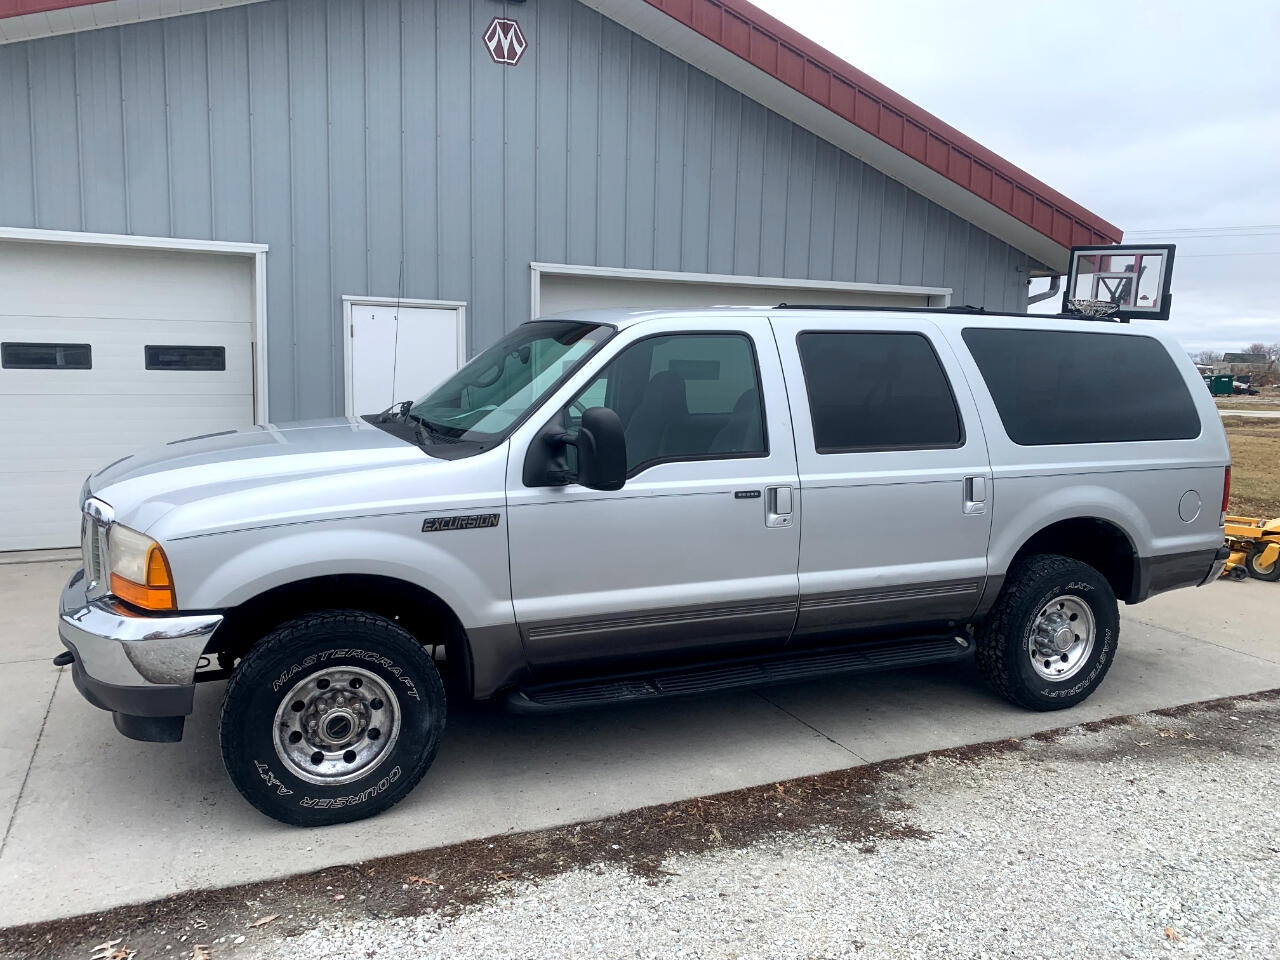 2001 Ford Excursion XLT 4WD